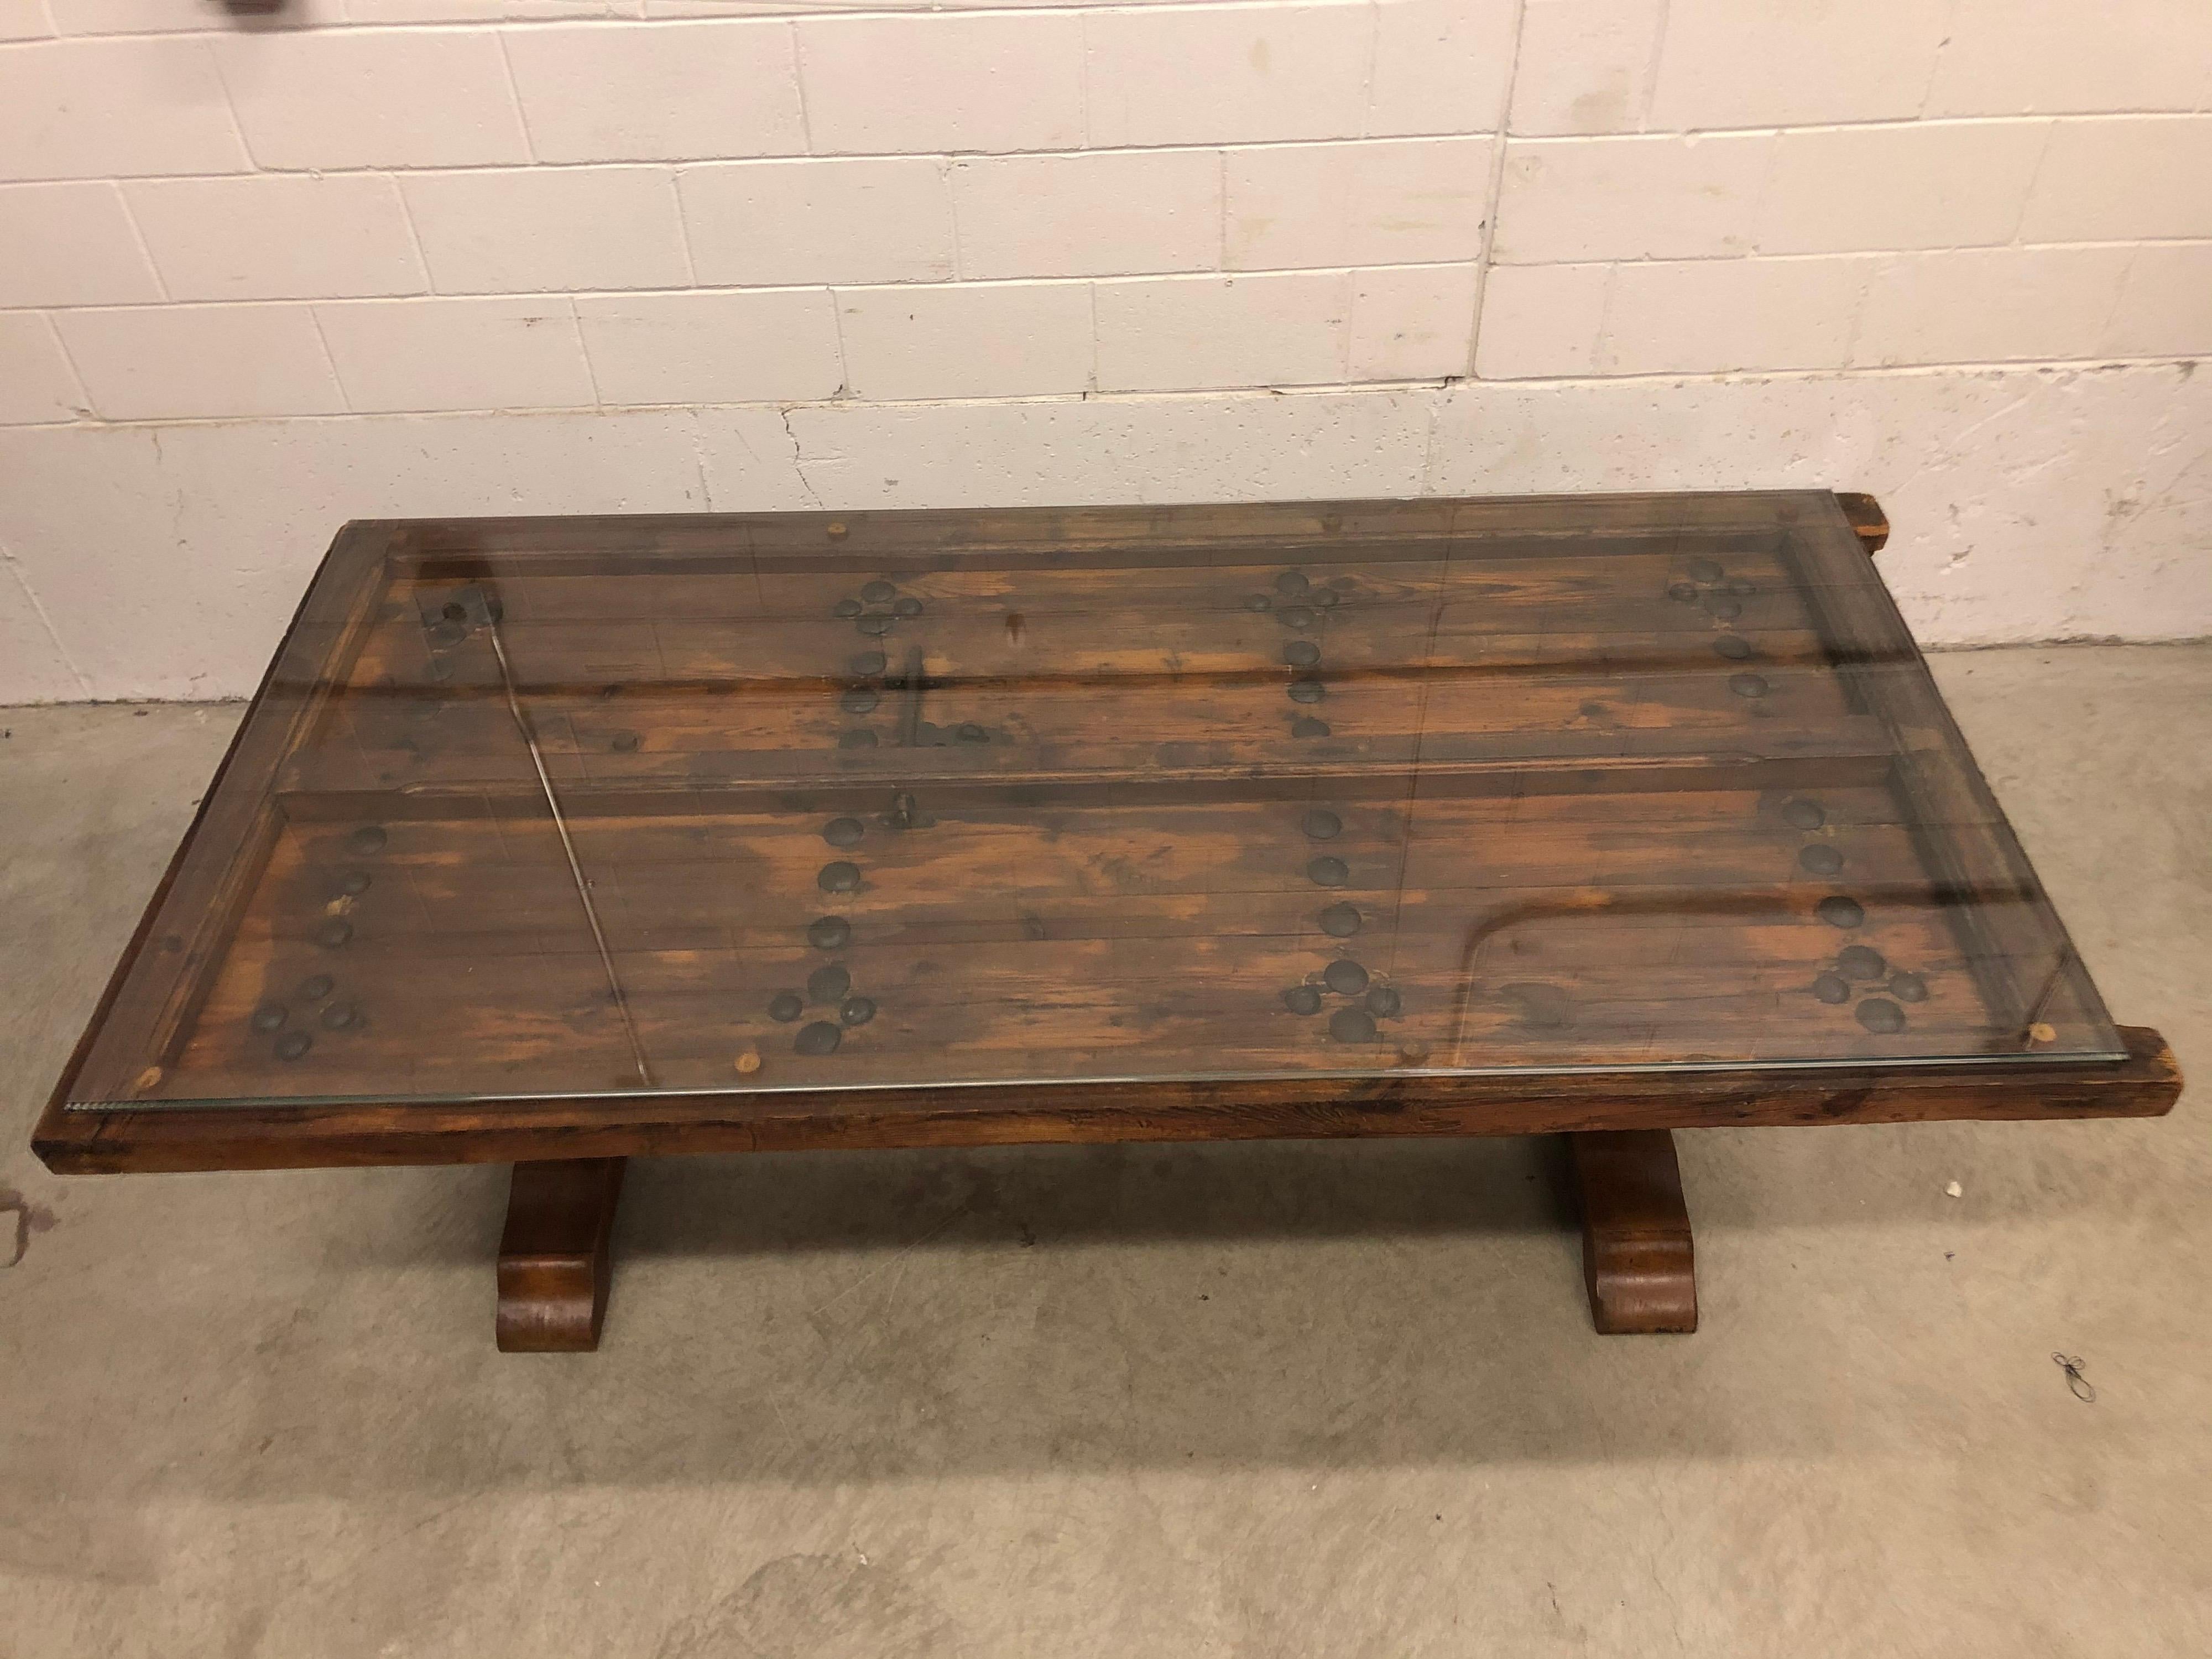 Vintage Gothic recycled door dining room table with glass top. The door has beautiful iron accents and door retains all the hand carved details that can be seen under the glass top. Great conversation piece for entertaining!